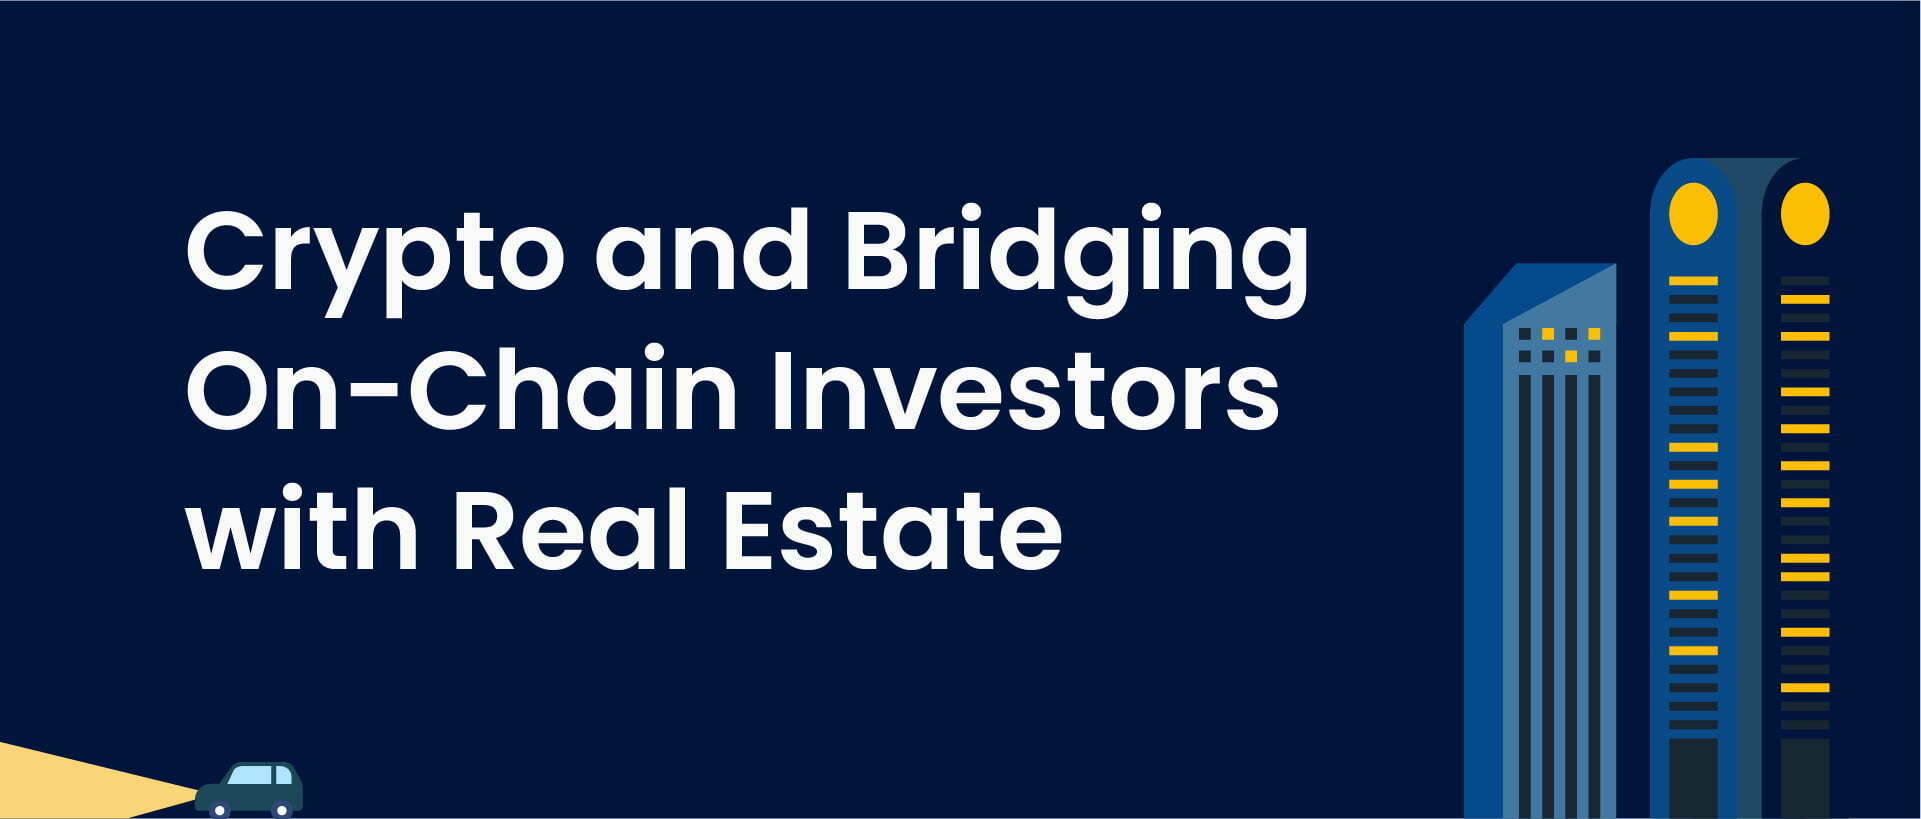 How Can Crypto Help Bridge the Gap Between Traditional Real Estate Investors and Crypto Investors